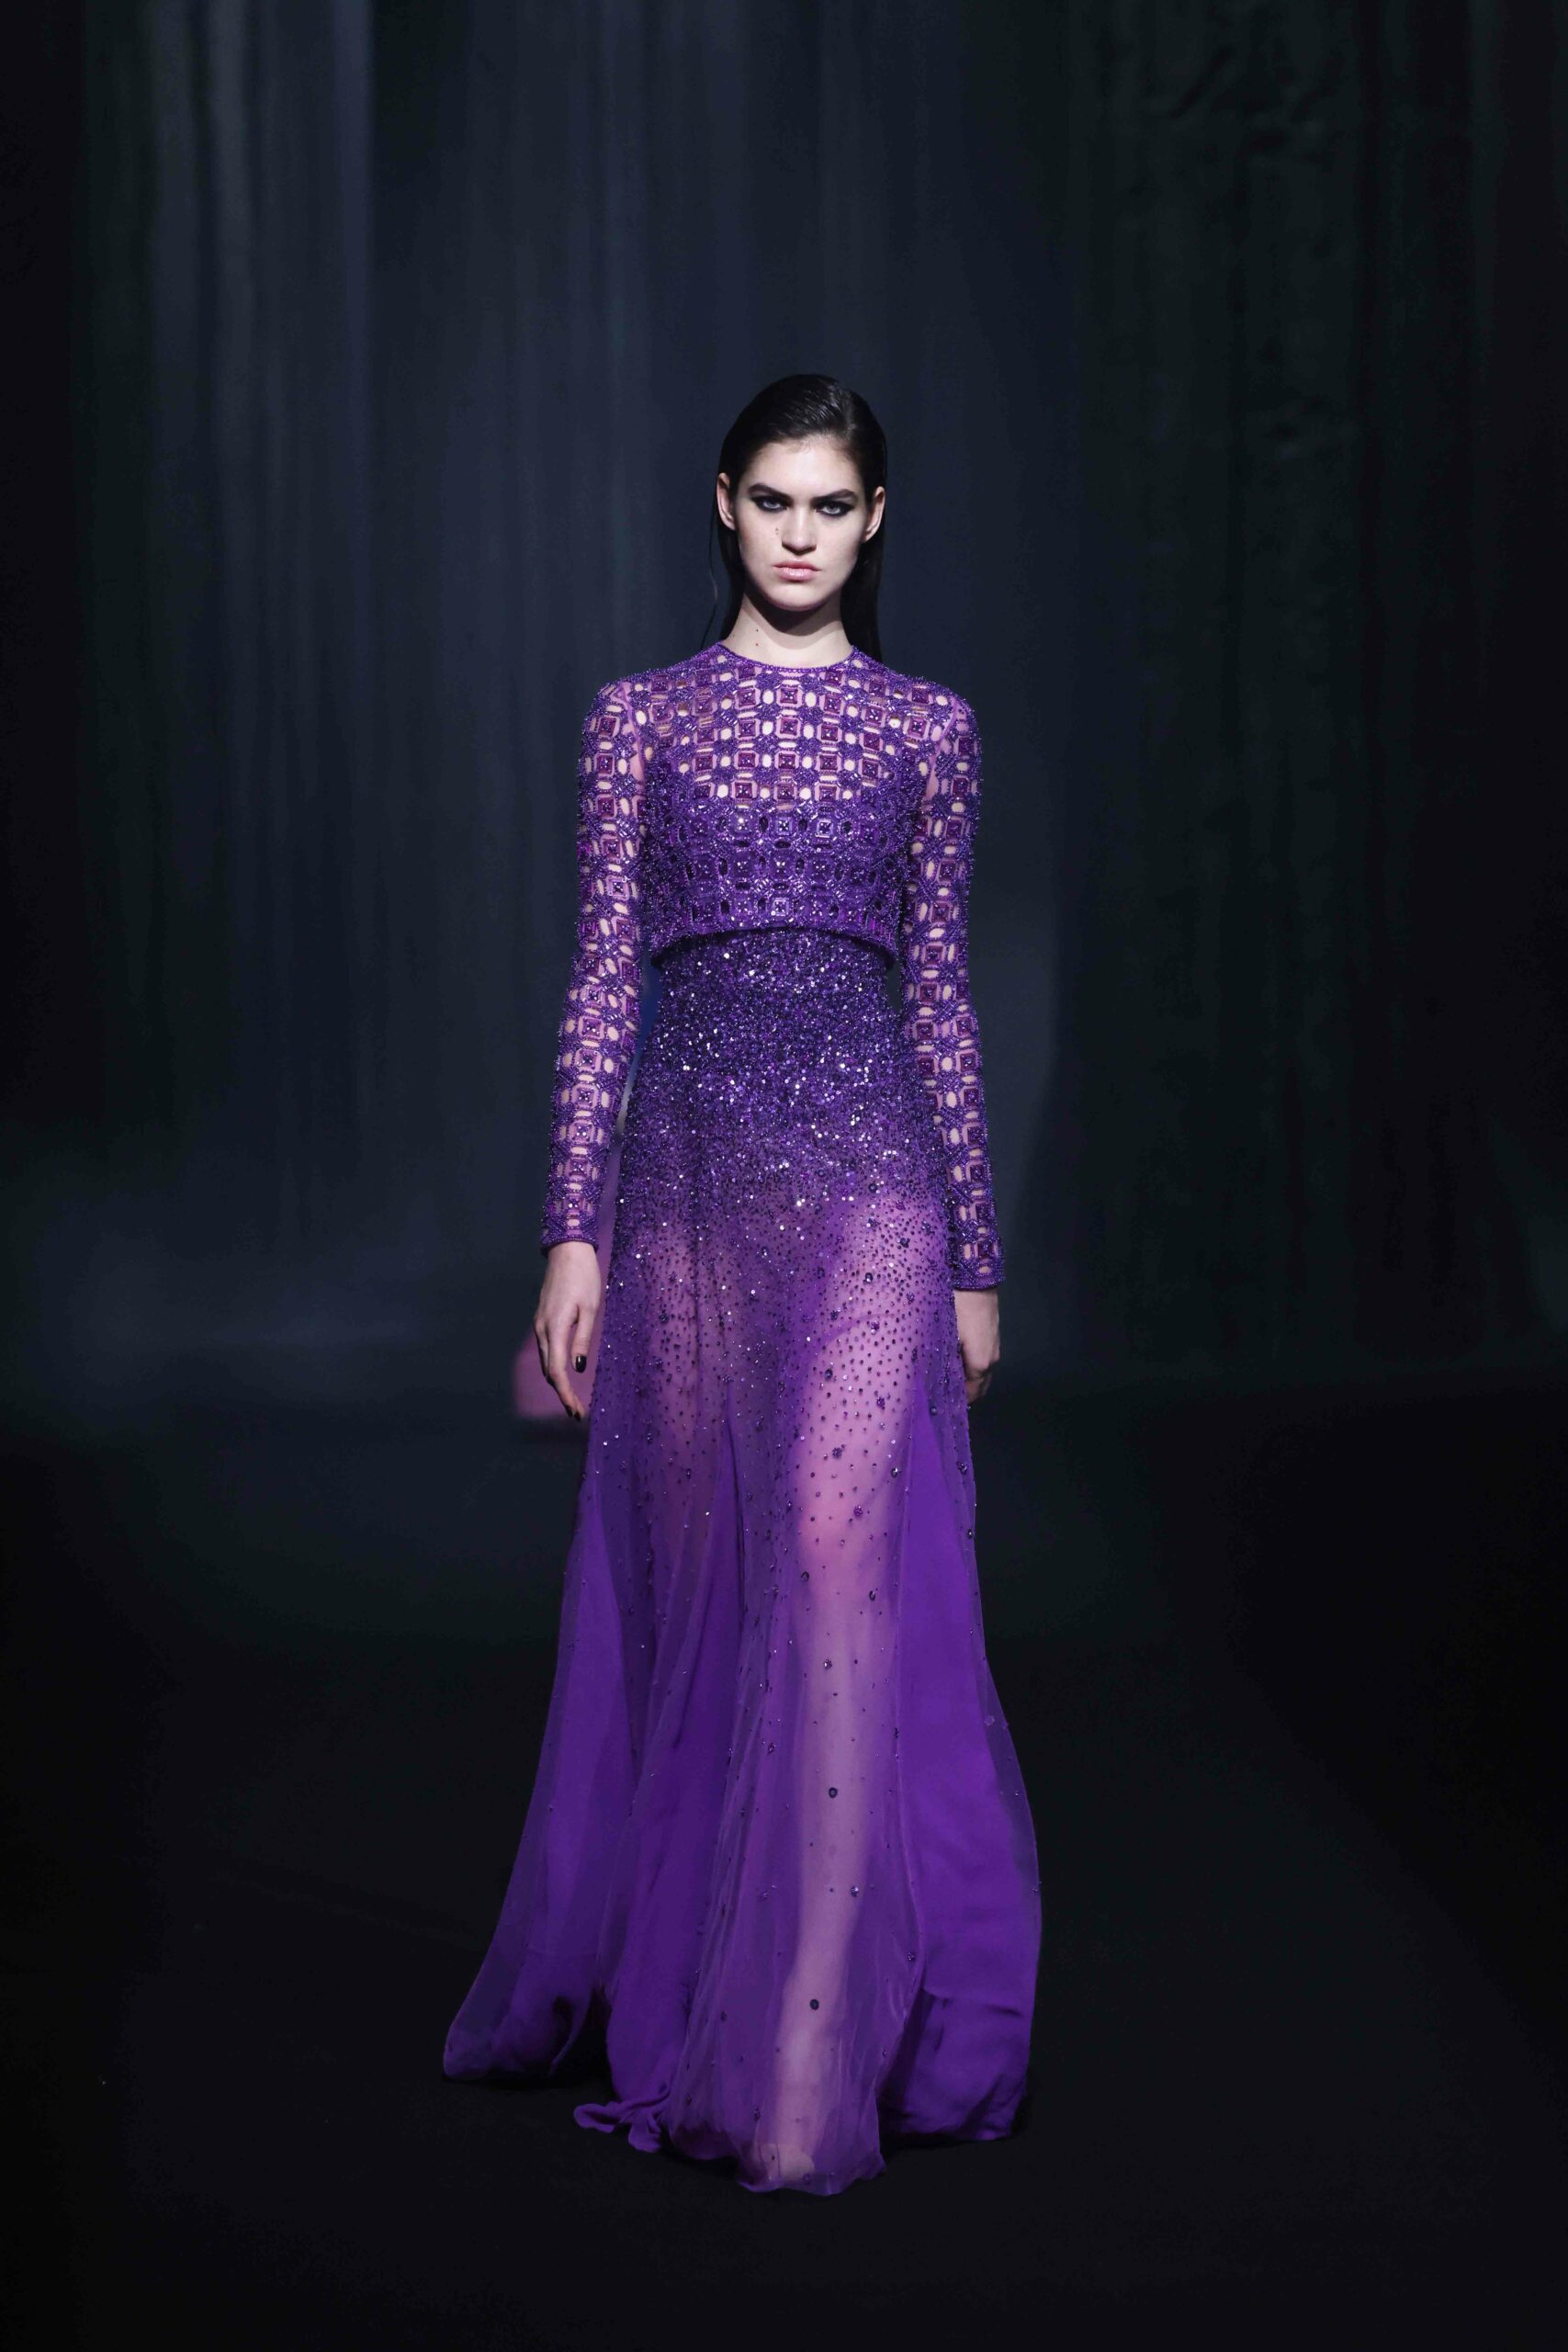 Georges Hobeika opens Harrods pop-up ahead of permanent space in 2023